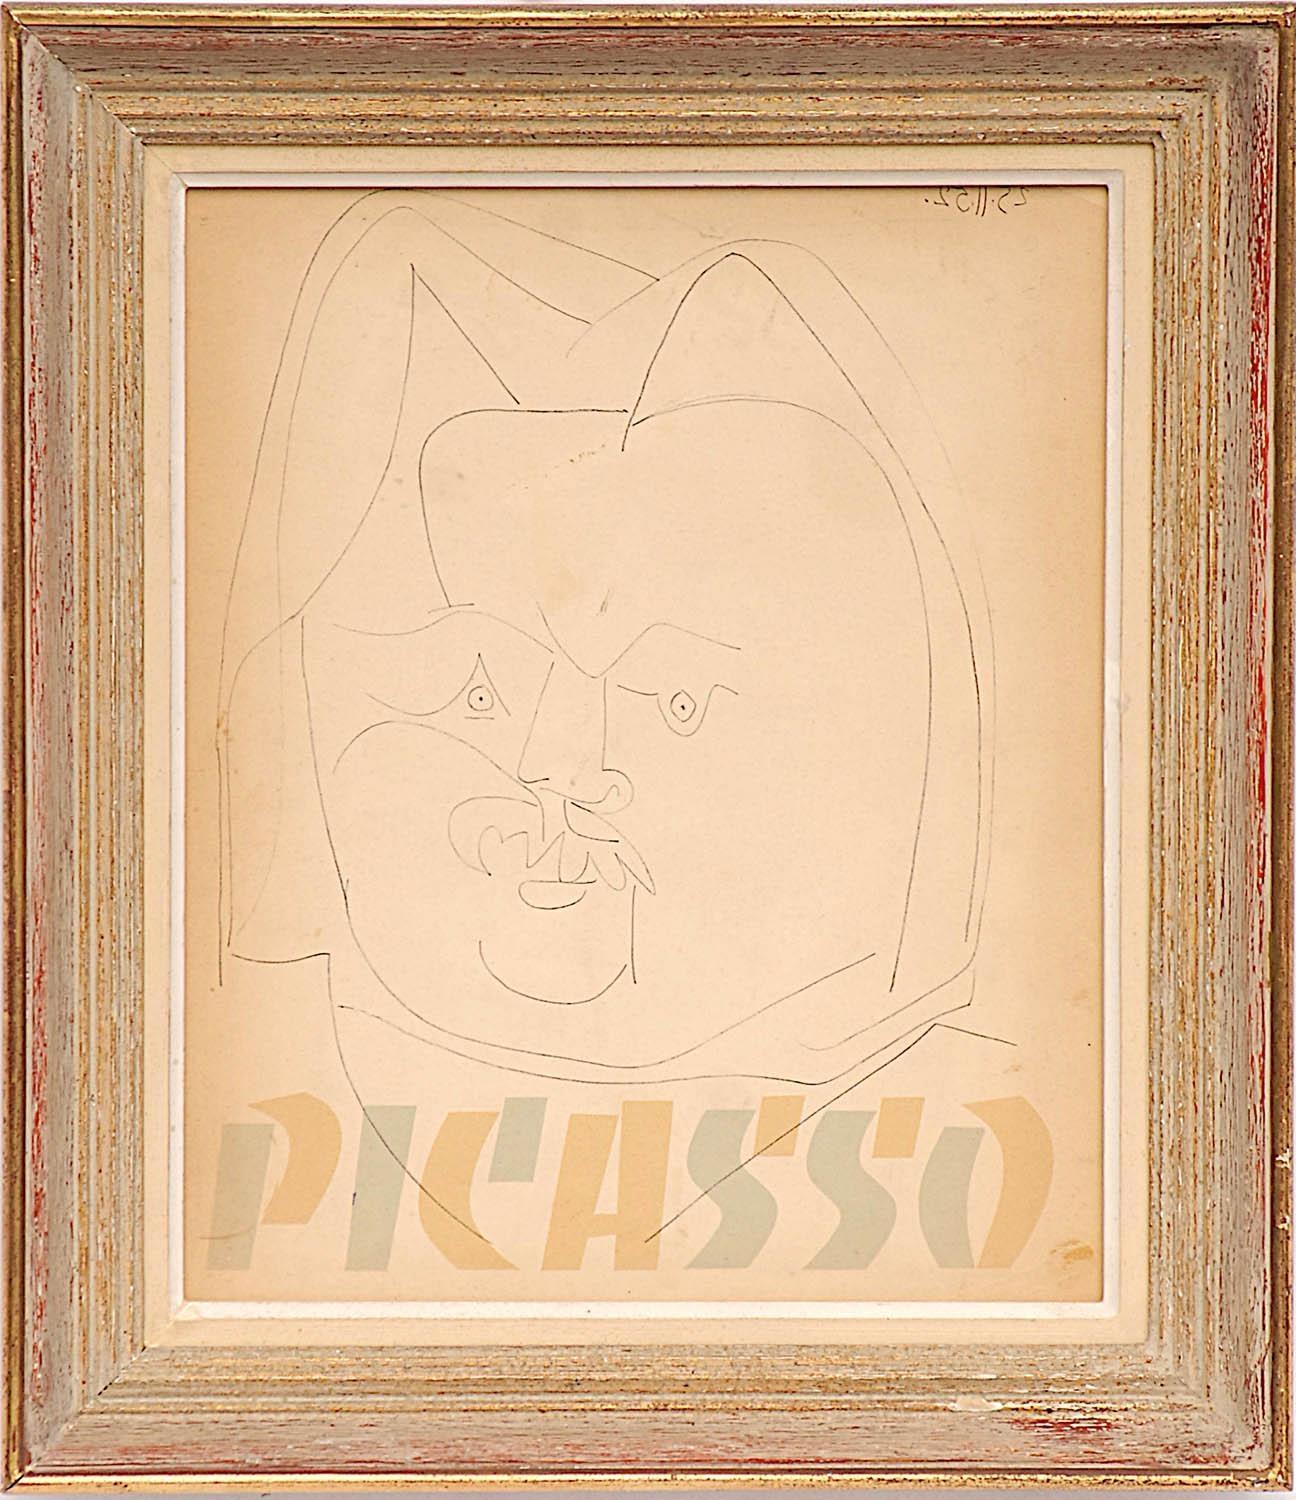 PABLO PICASSO 'Balzac', 1959, lithograph - Couveture, Suite: Cincinnati, printed by Young & Klein,